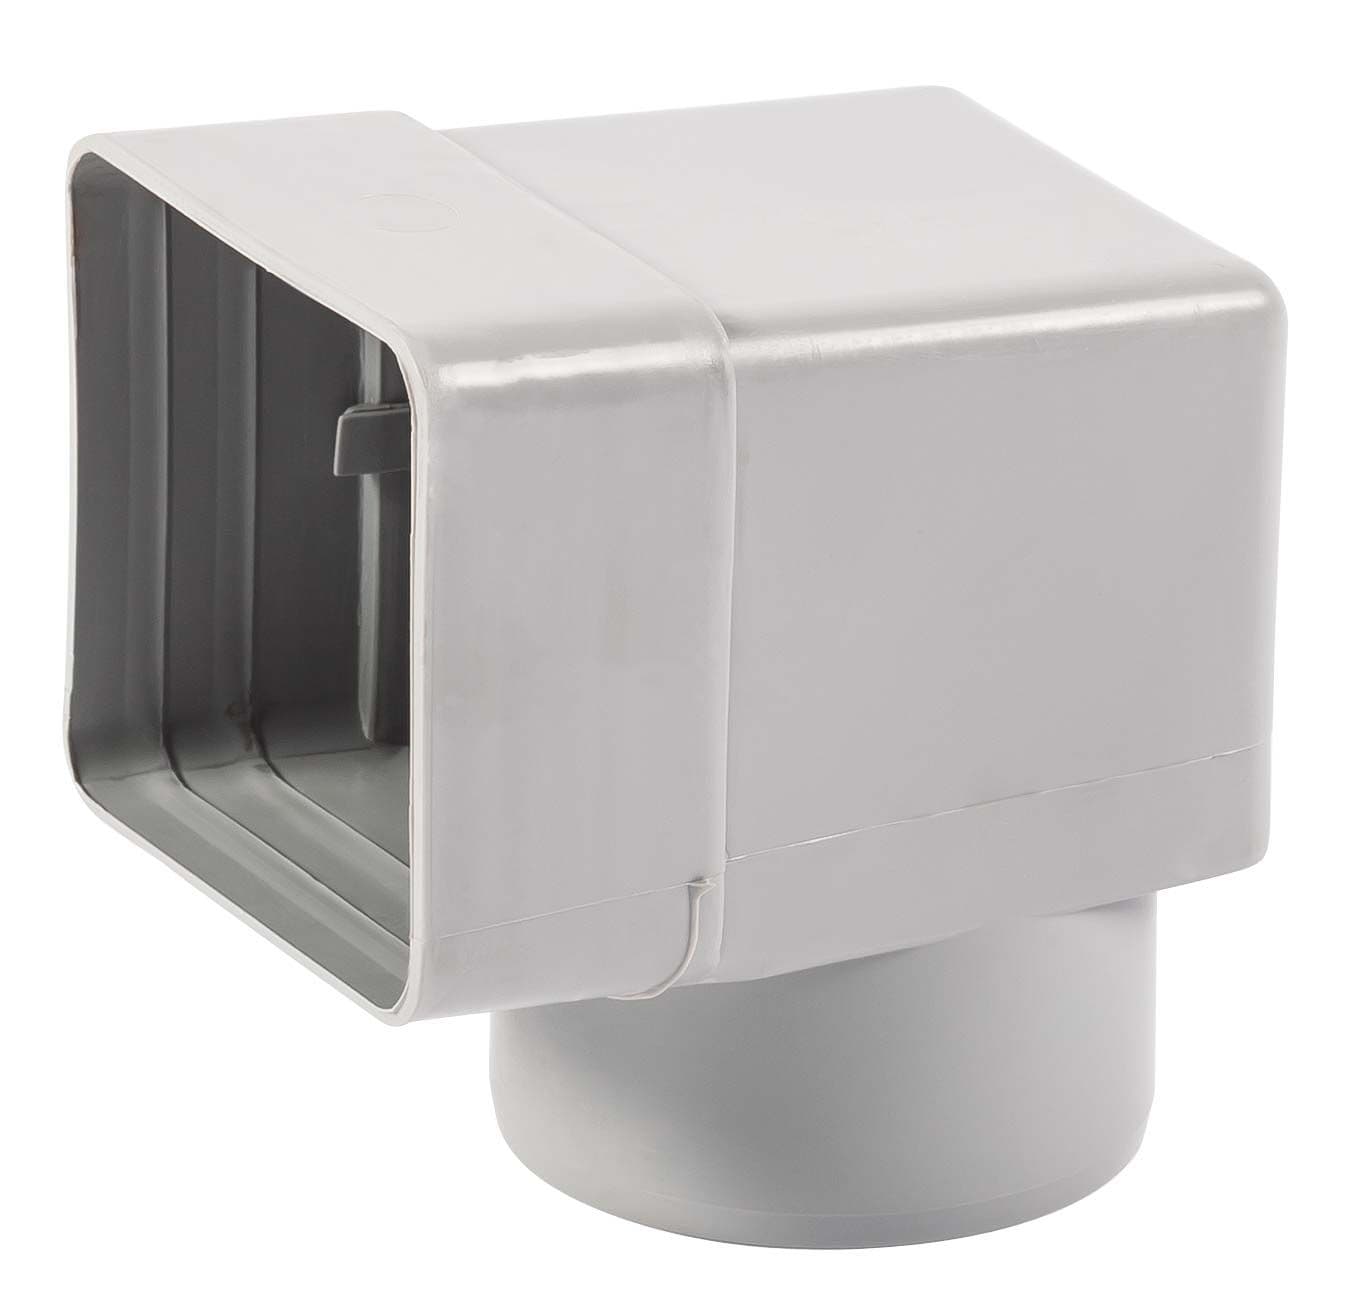 Ryno TPHC Horizontal Drainage Outlet Down Pipe Connectors - All Sizes